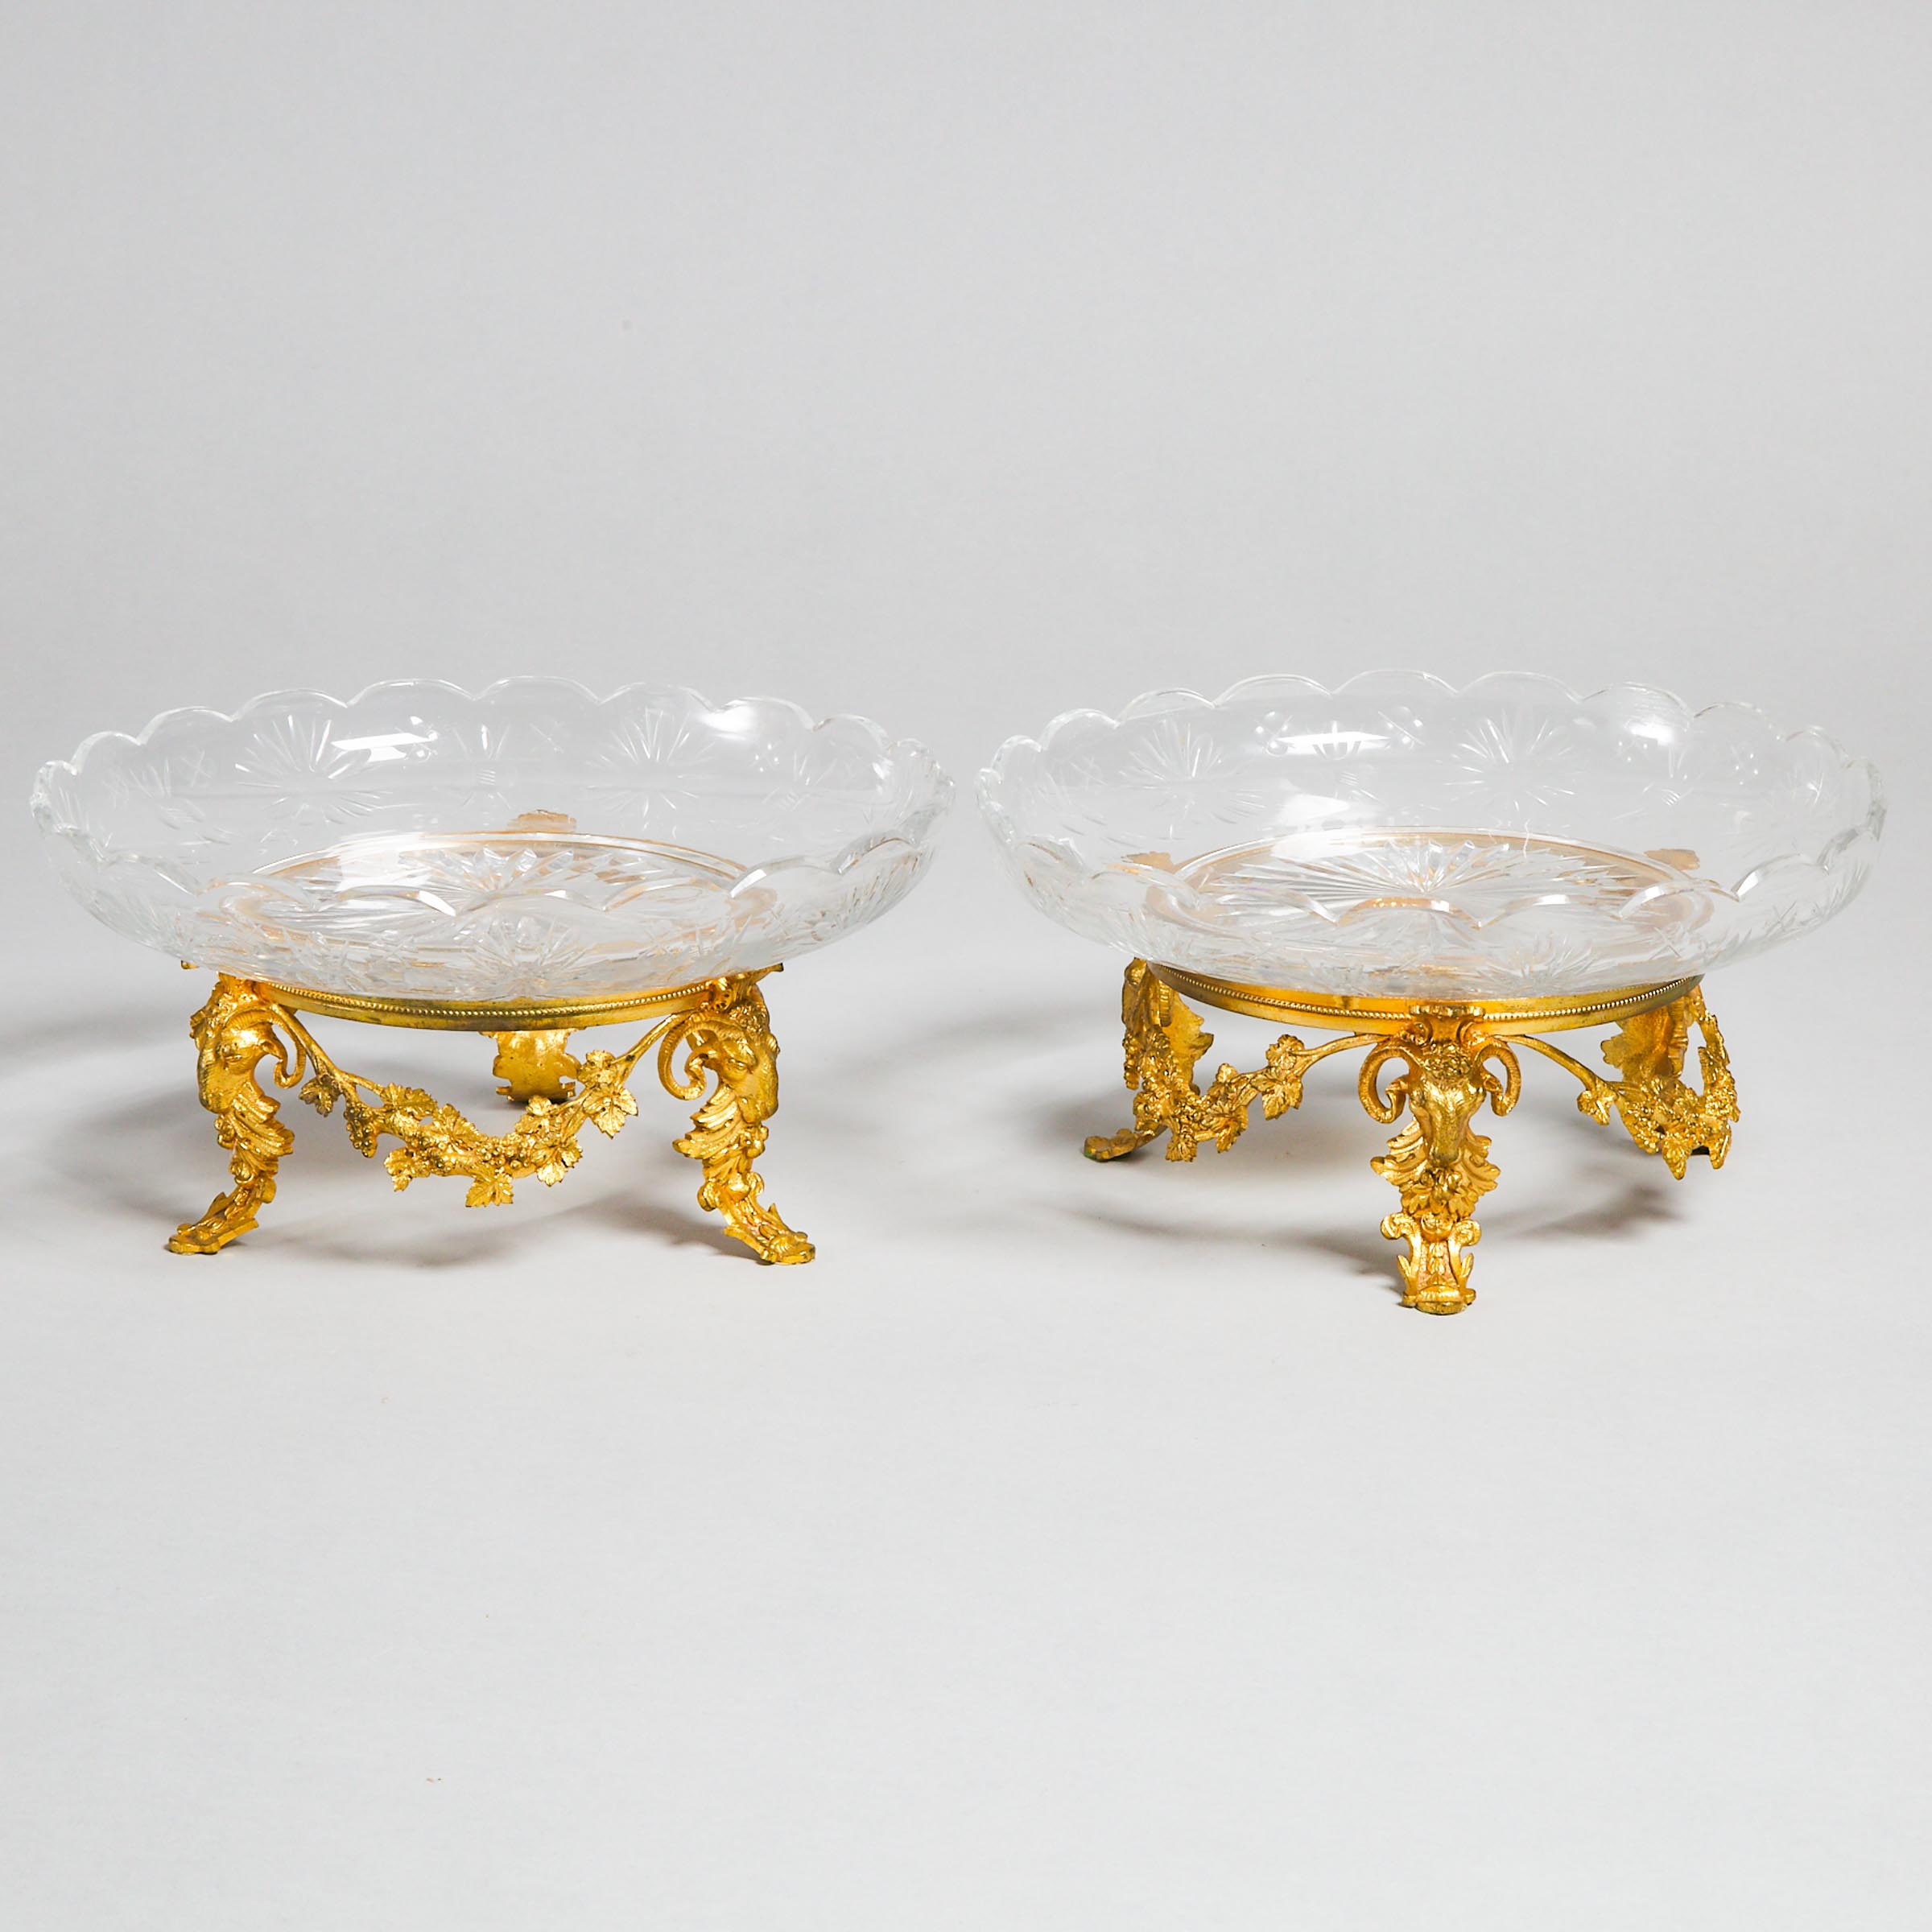 Pair of Austrian Cut Glass Centerpiece Bowls on Ormolu Stands, early-mid 20th century